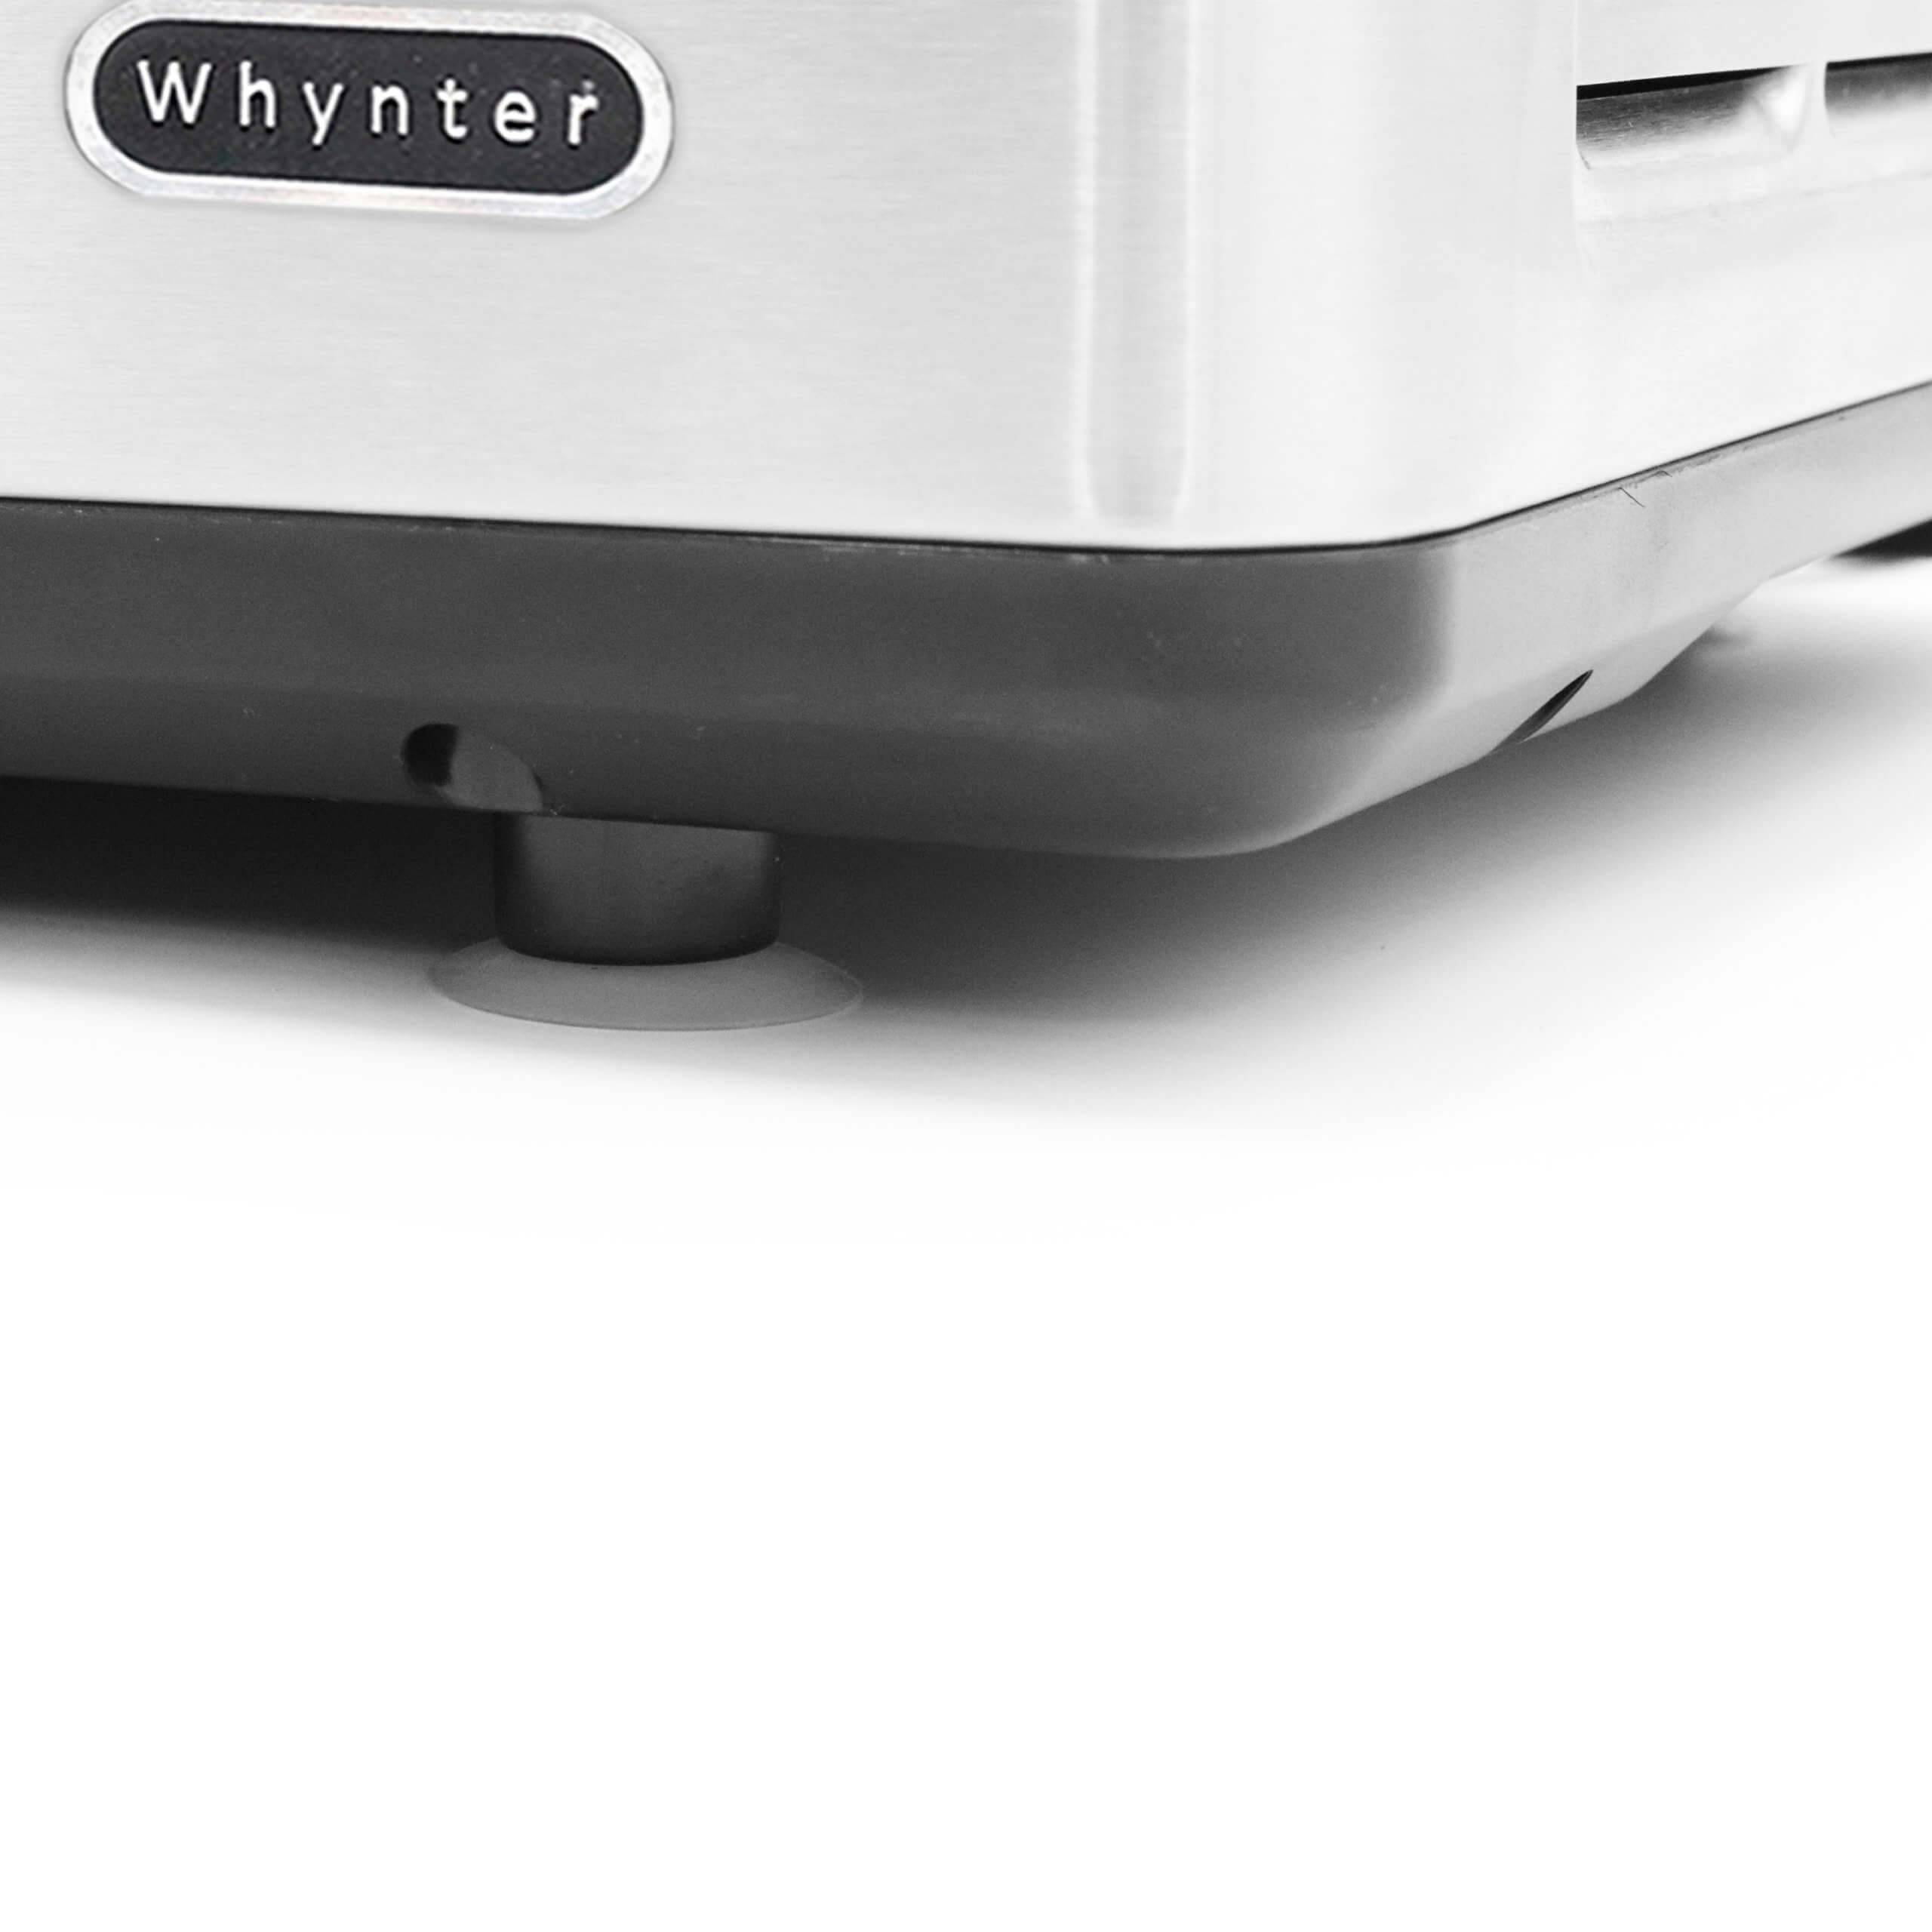 Whynter ICR-300SS Portable Instant Automatic Compressor Ice